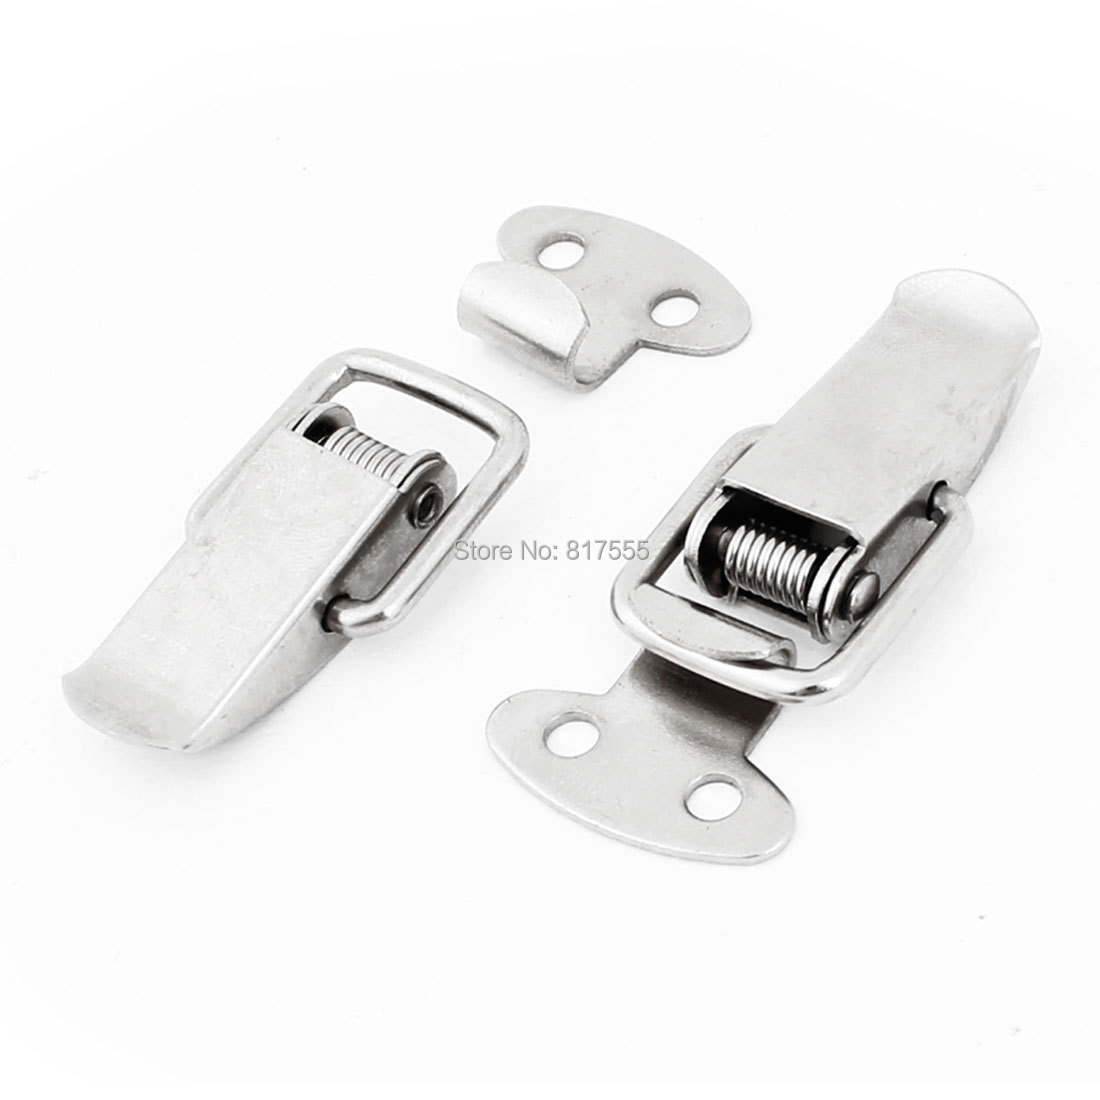 2 Pcs lot Stainless Small Clasp Hasp Connector Tool Silver Tone Discount 50